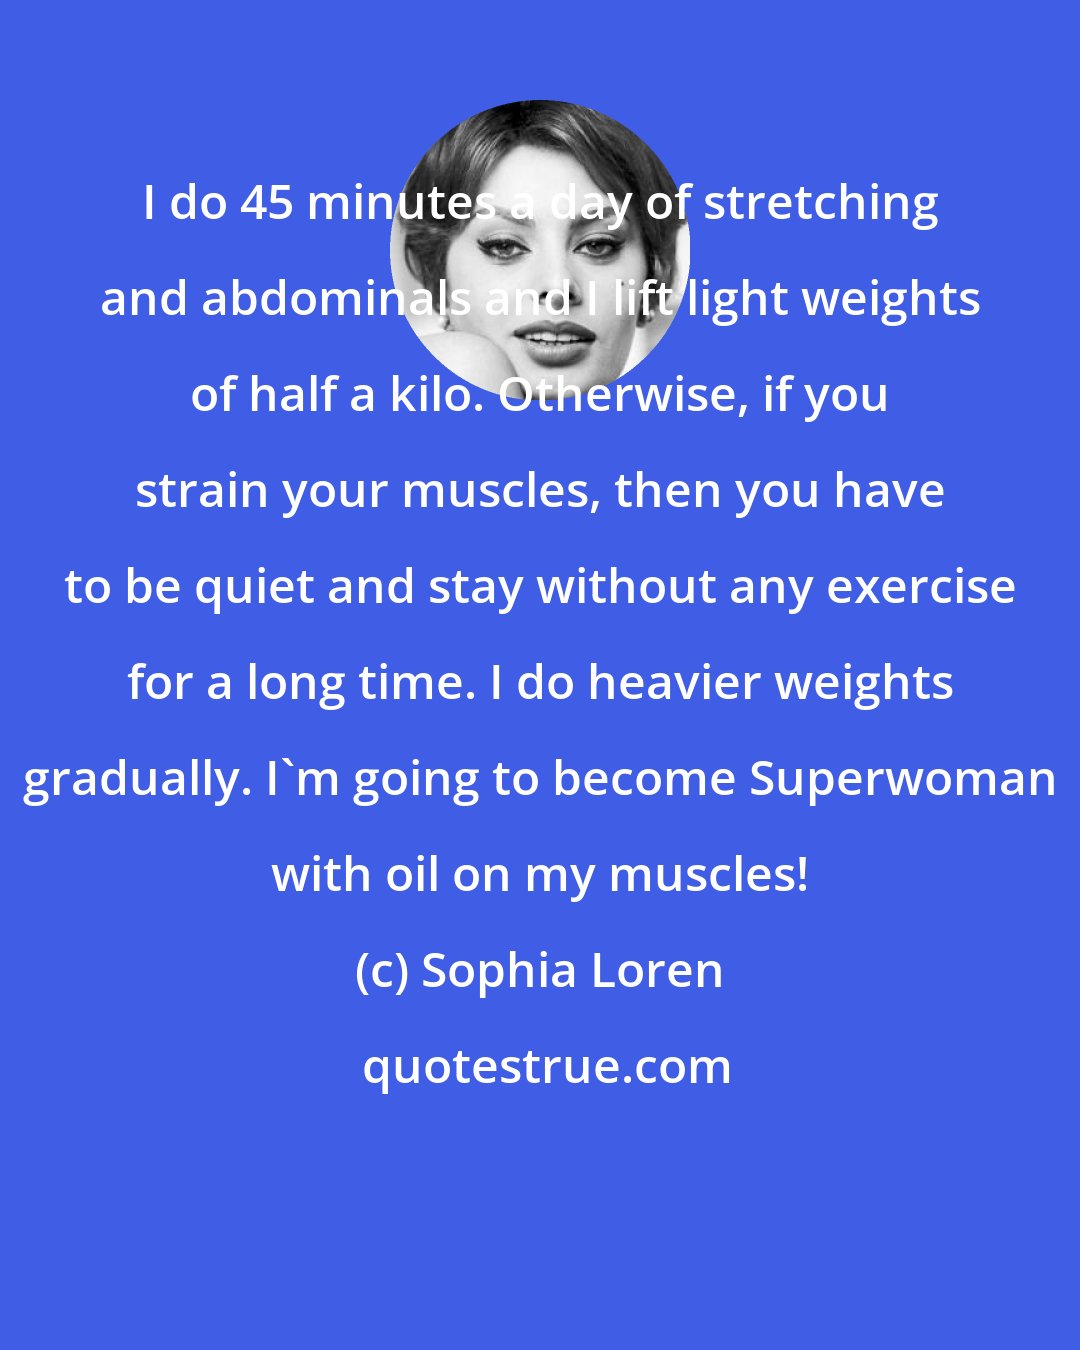 Sophia Loren: I do 45 minutes a day of stretching and abdominals and I lift light weights of half a kilo. Otherwise, if you strain your muscles, then you have to be quiet and stay without any exercise for a long time. I do heavier weights gradually. I'm going to become Superwoman with oil on my muscles!